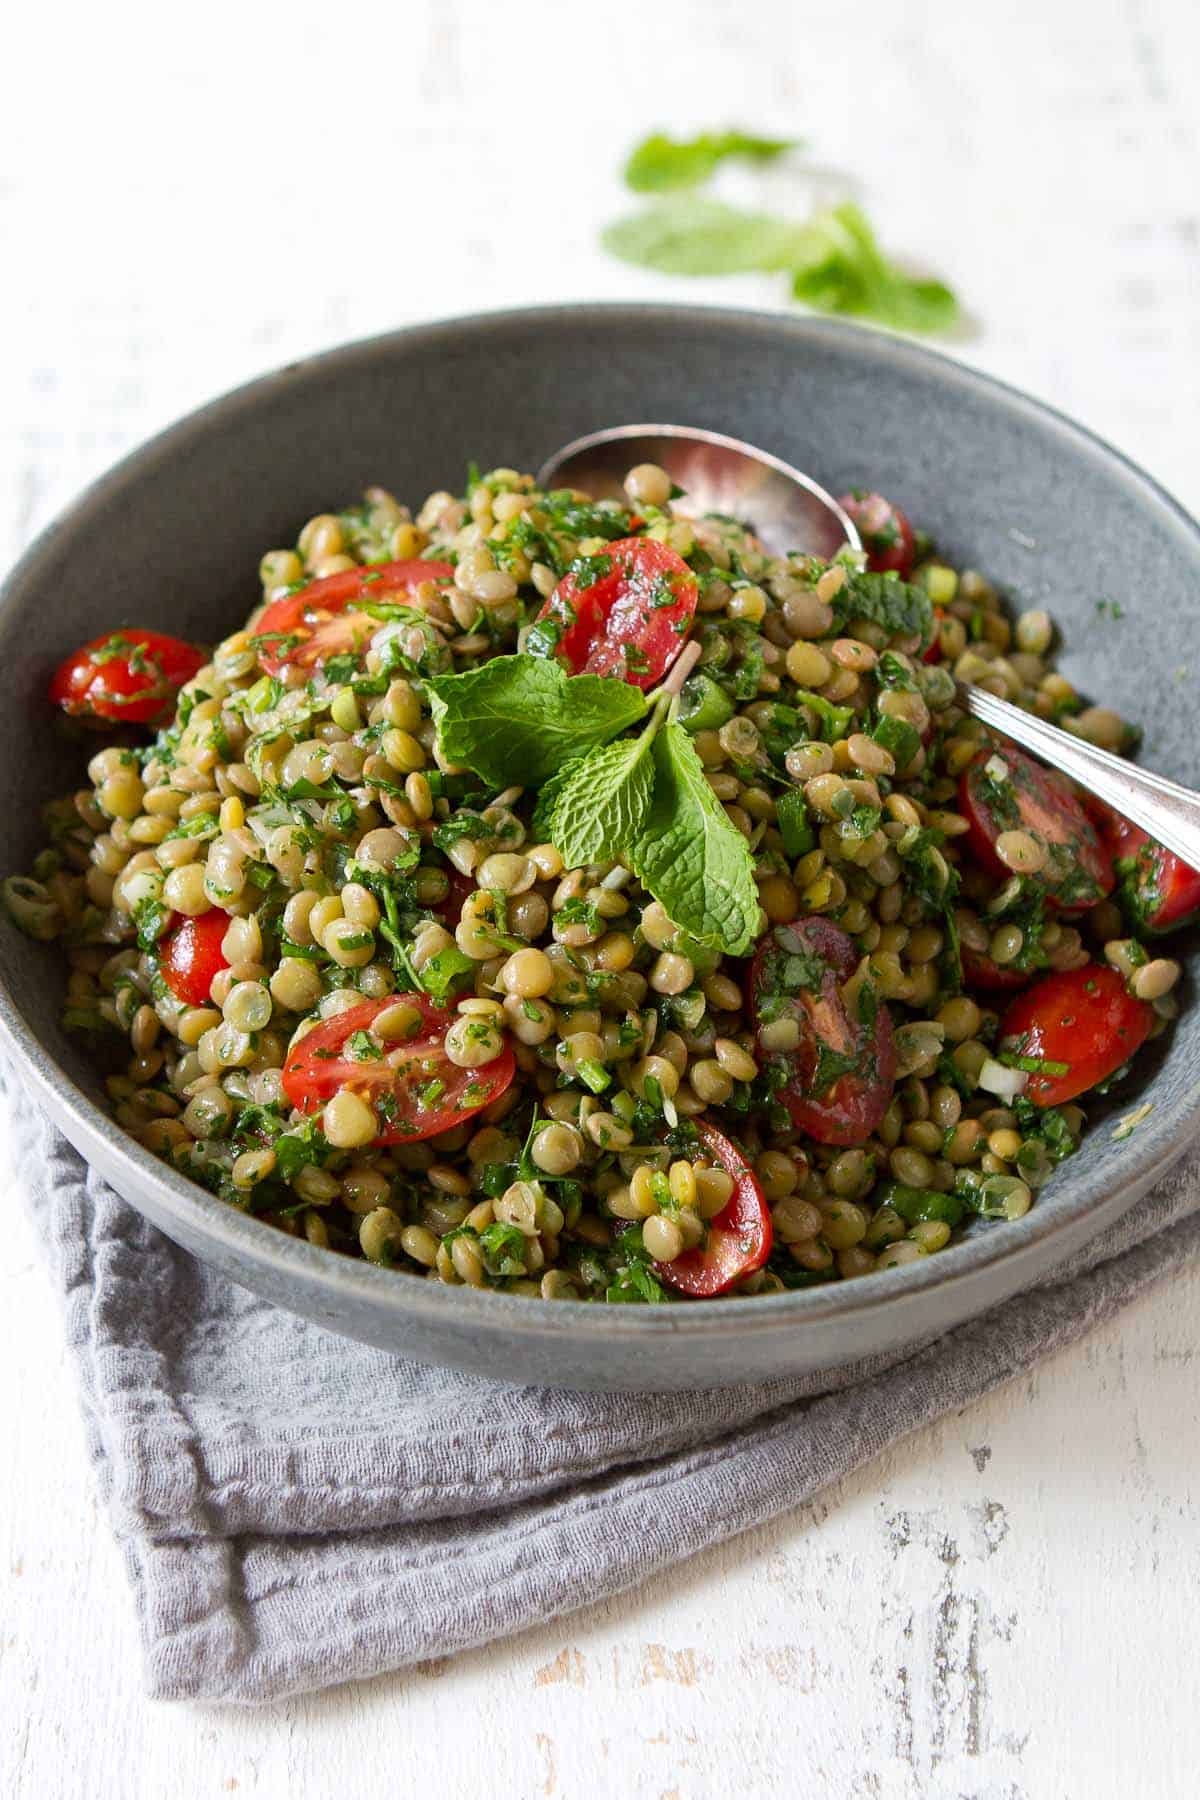 This easy lentil tabbouleh salad is fantastic for meal prep! The flavors get better and better over time. | Salad | Recipe | Recipes cold | Recipes healthy | Vegan | Plant based | Dressing